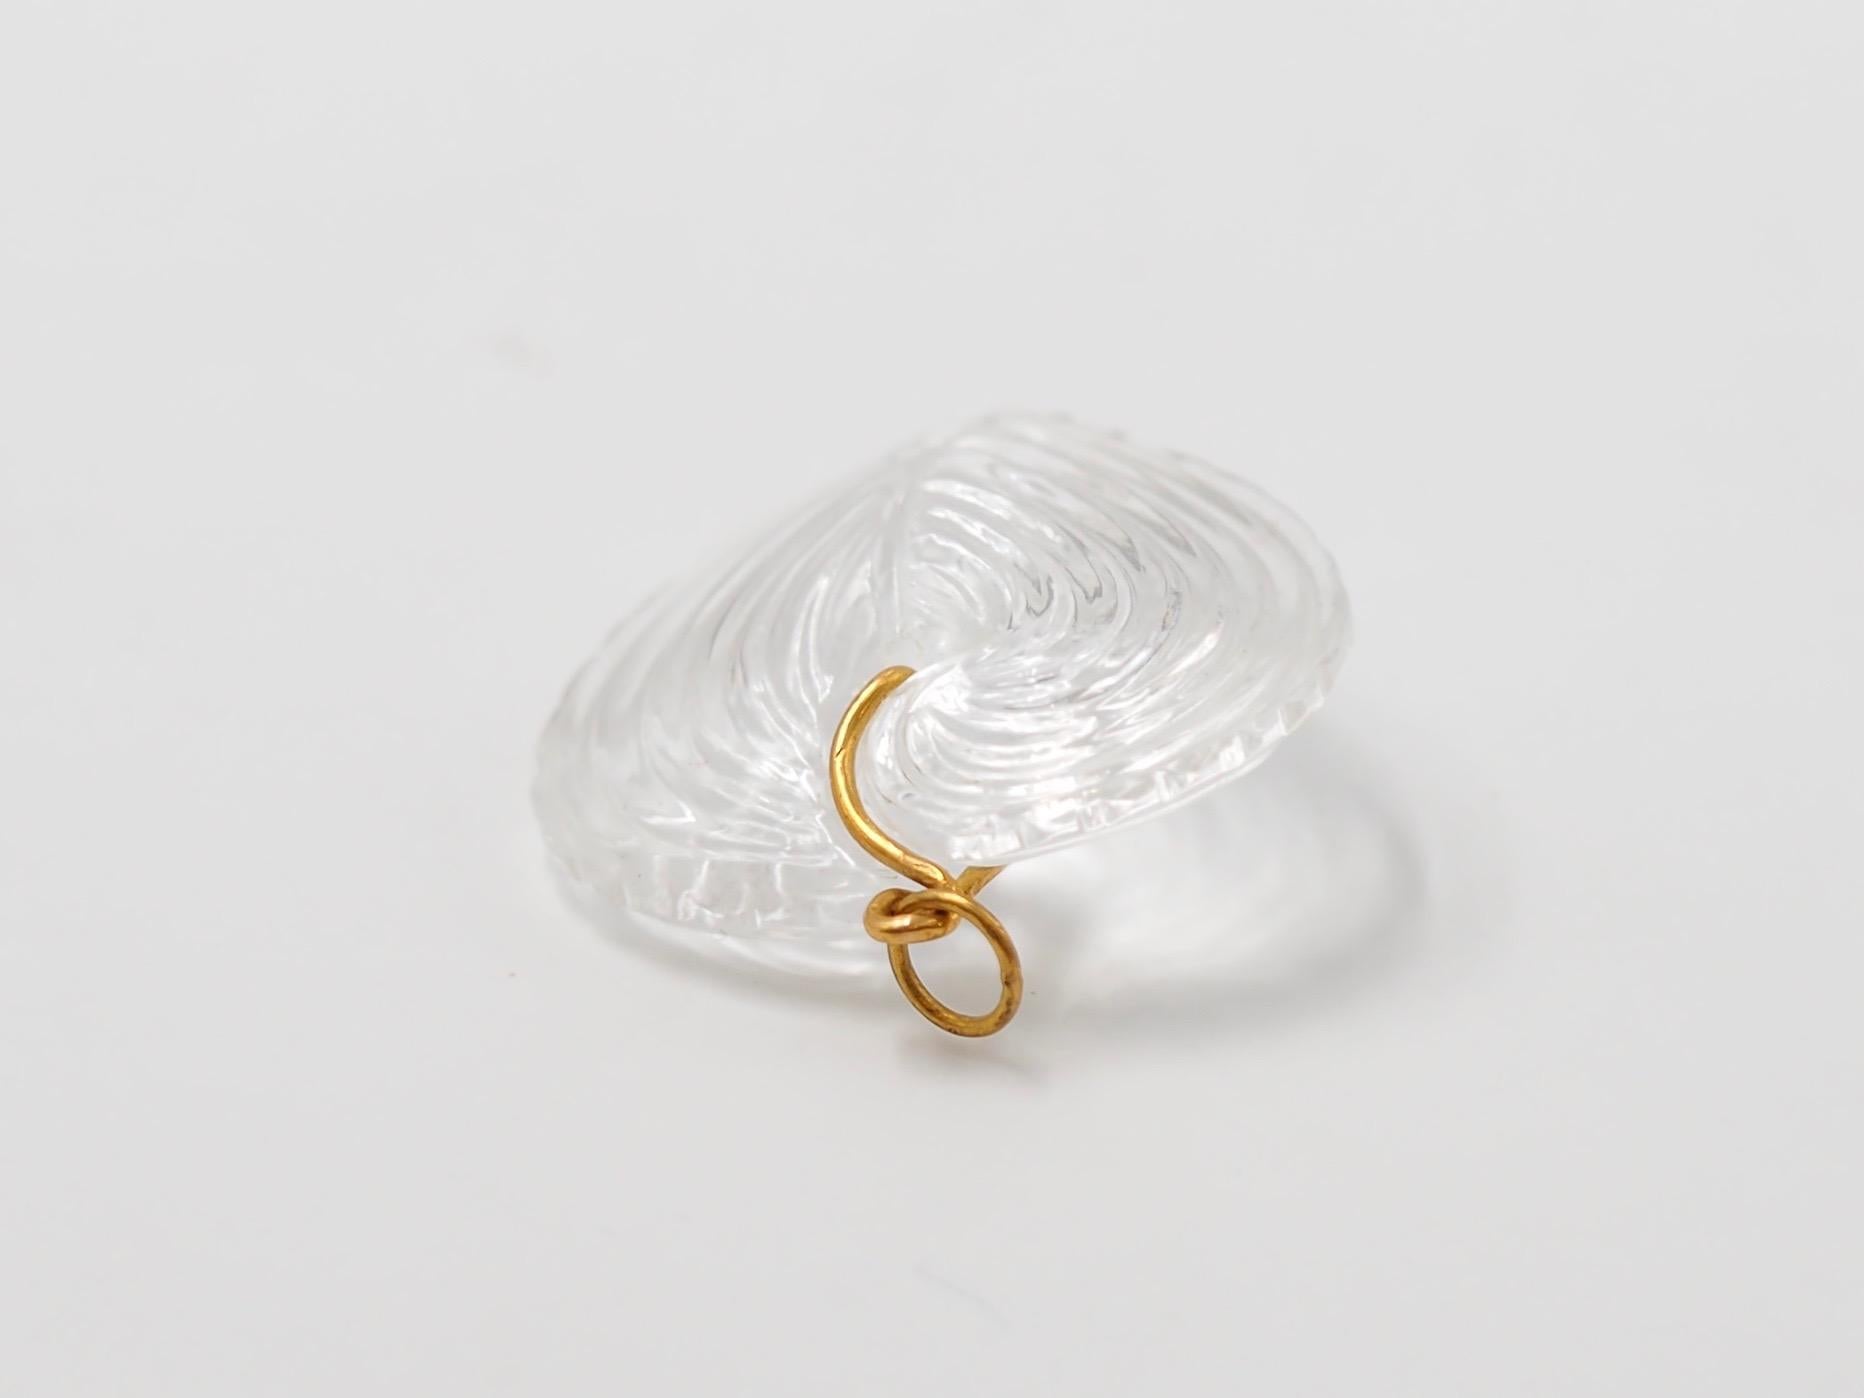 Hand-carved and handmade, this pendant represents a heart seashell in Rock Crystal. The stone is simply drilled to allow a curved 22 karat gold wire that is twisted and finishes with a ring. 

2 sizes exist as you can see on one of the photo. This